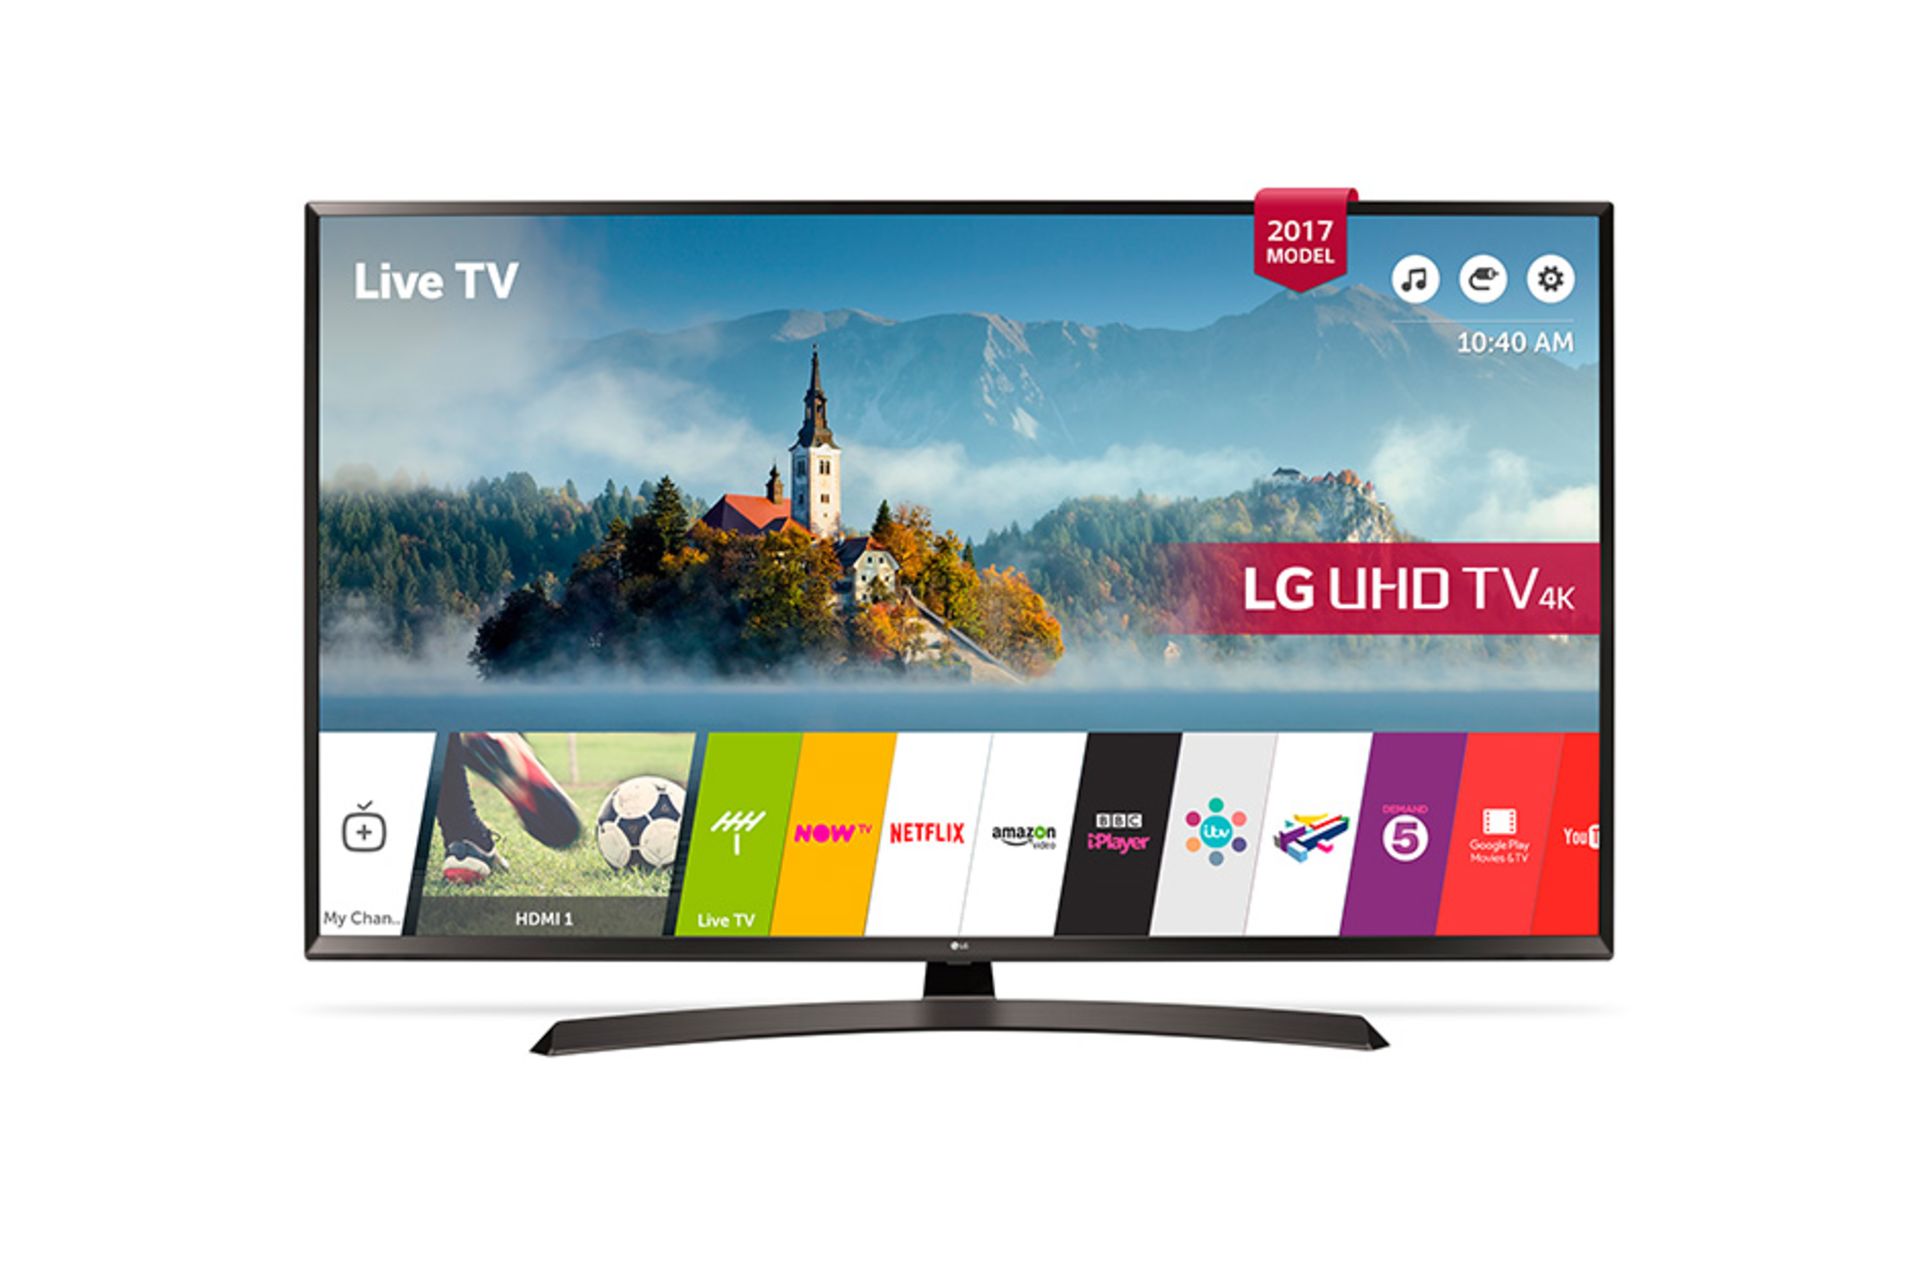 V Grade A LG 43 Inch ACTIVE HDR 4K ULTRA HD LED SMART TV WITH FREEVIEW HD & WEBOS 3.5 & WIFI